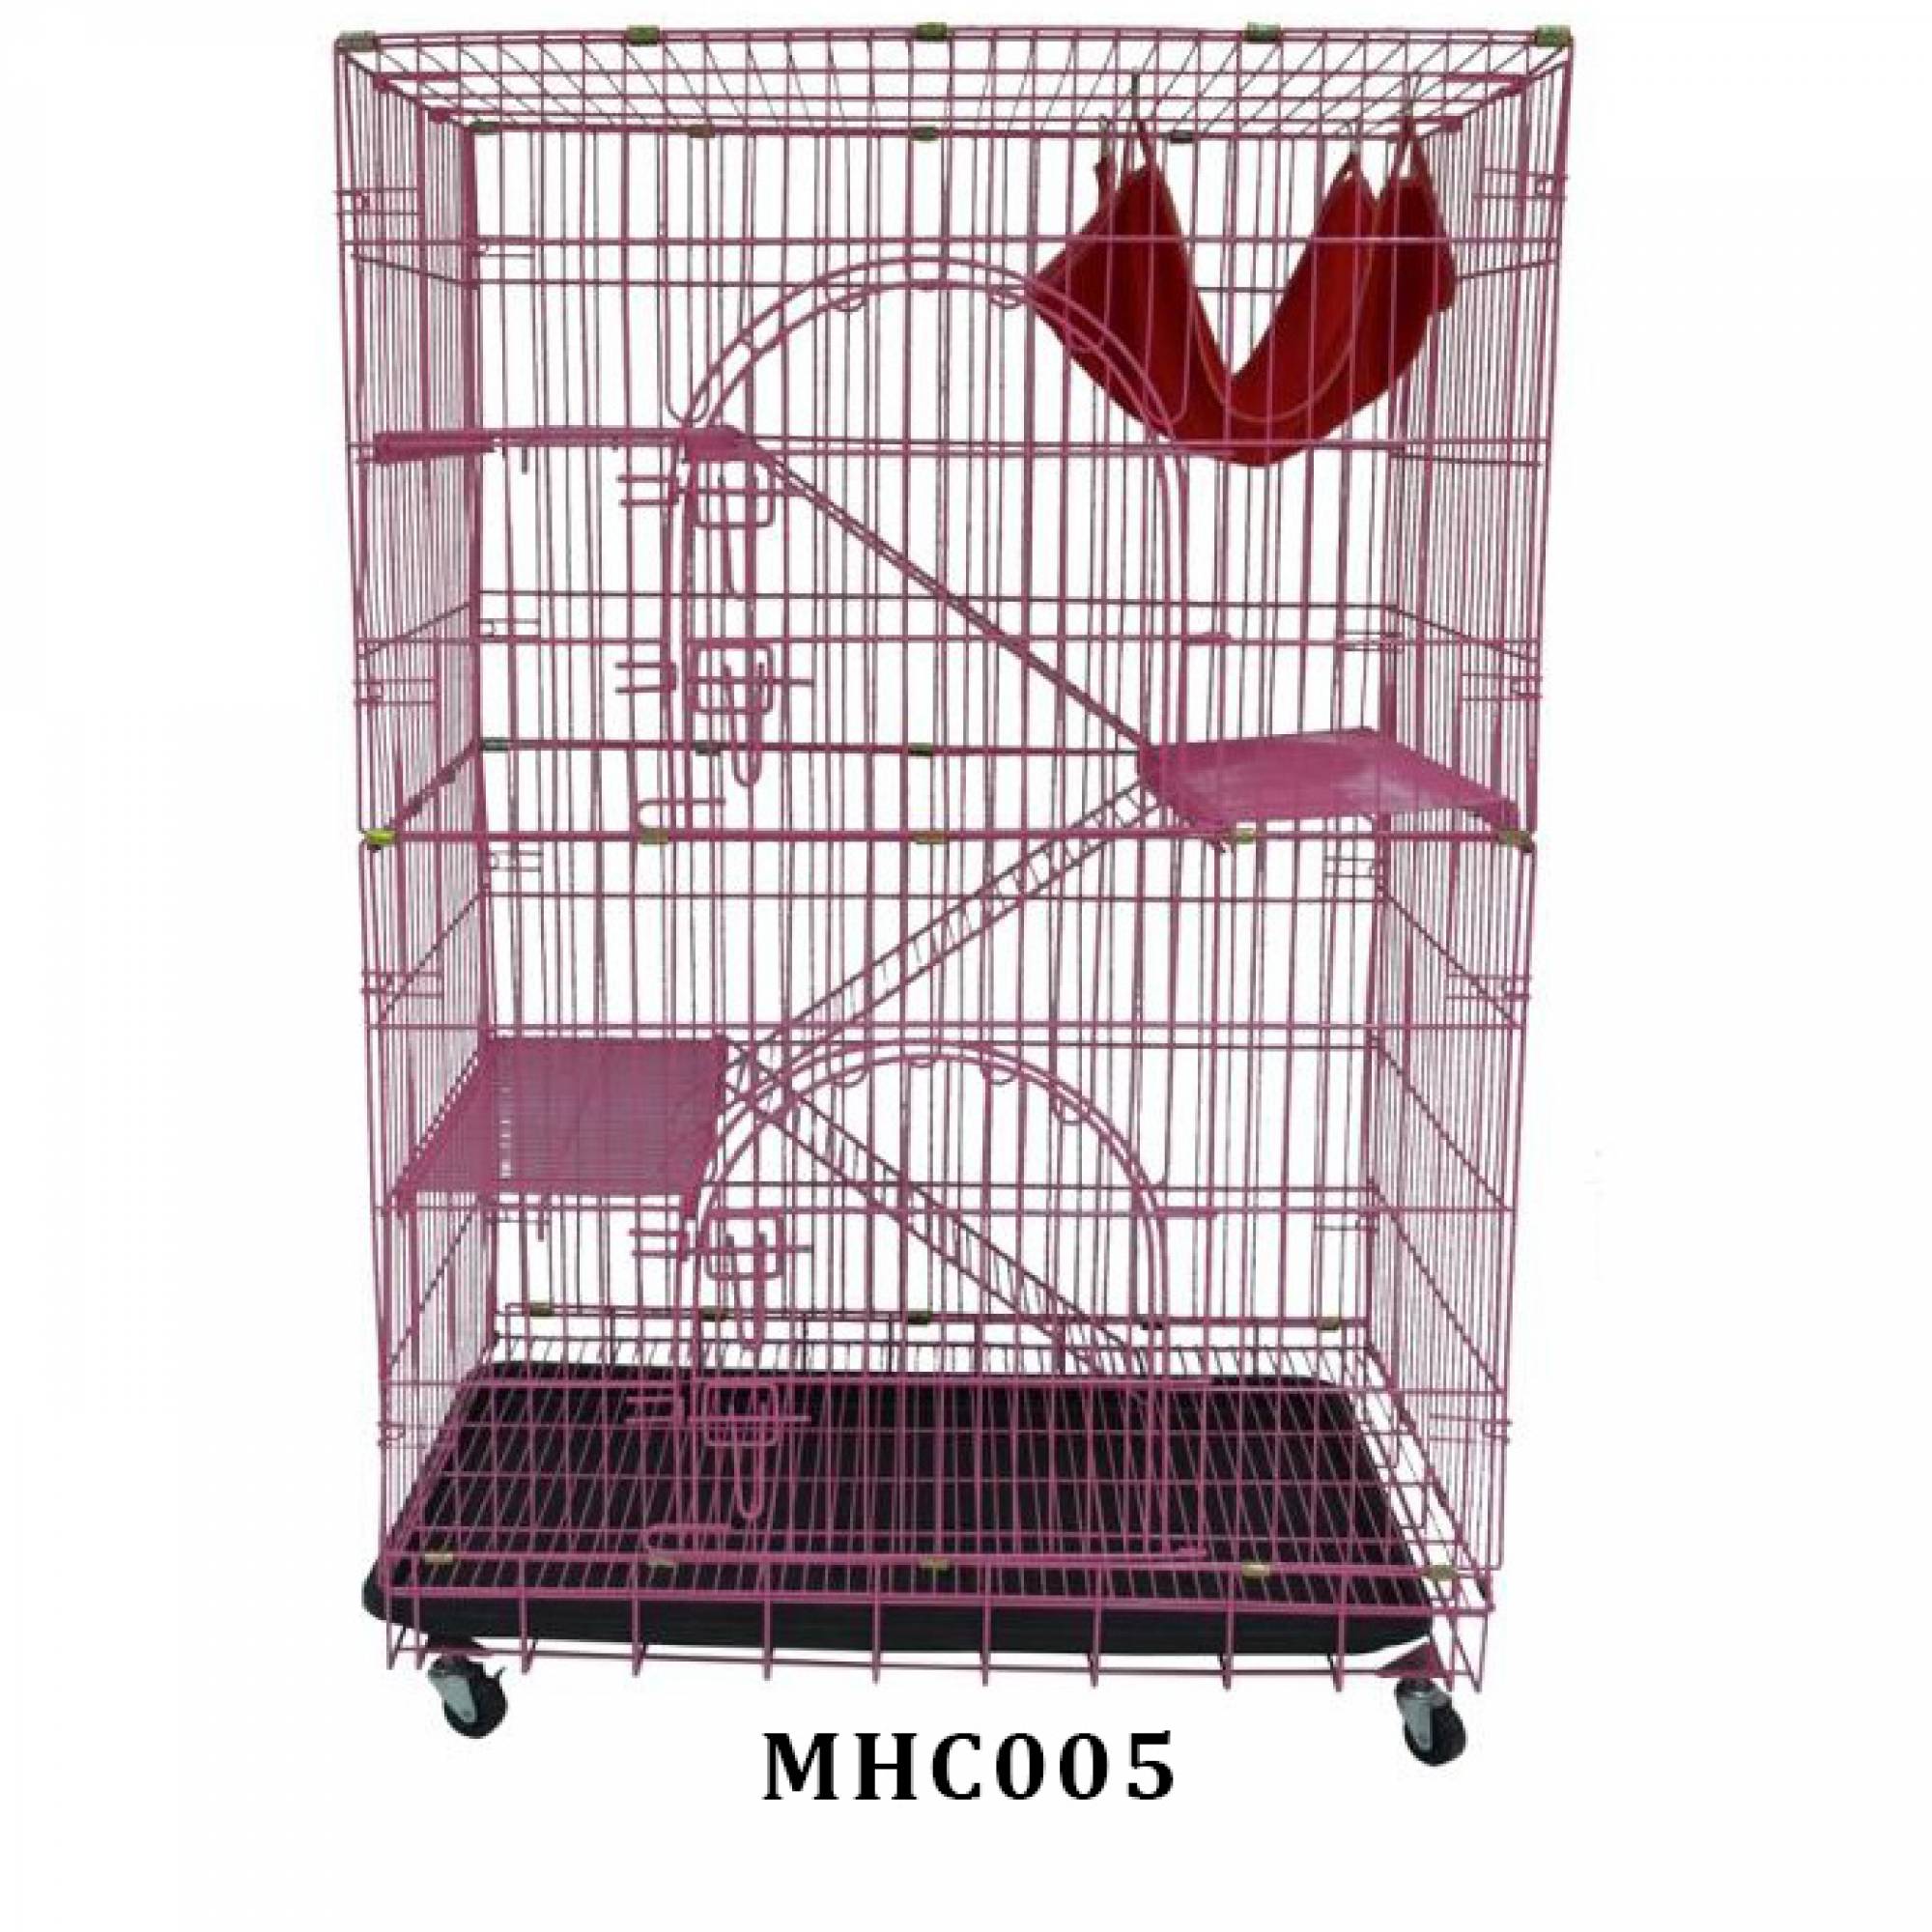 HHC005 - 24" to 36" 3-layers Cat Cage - 36"